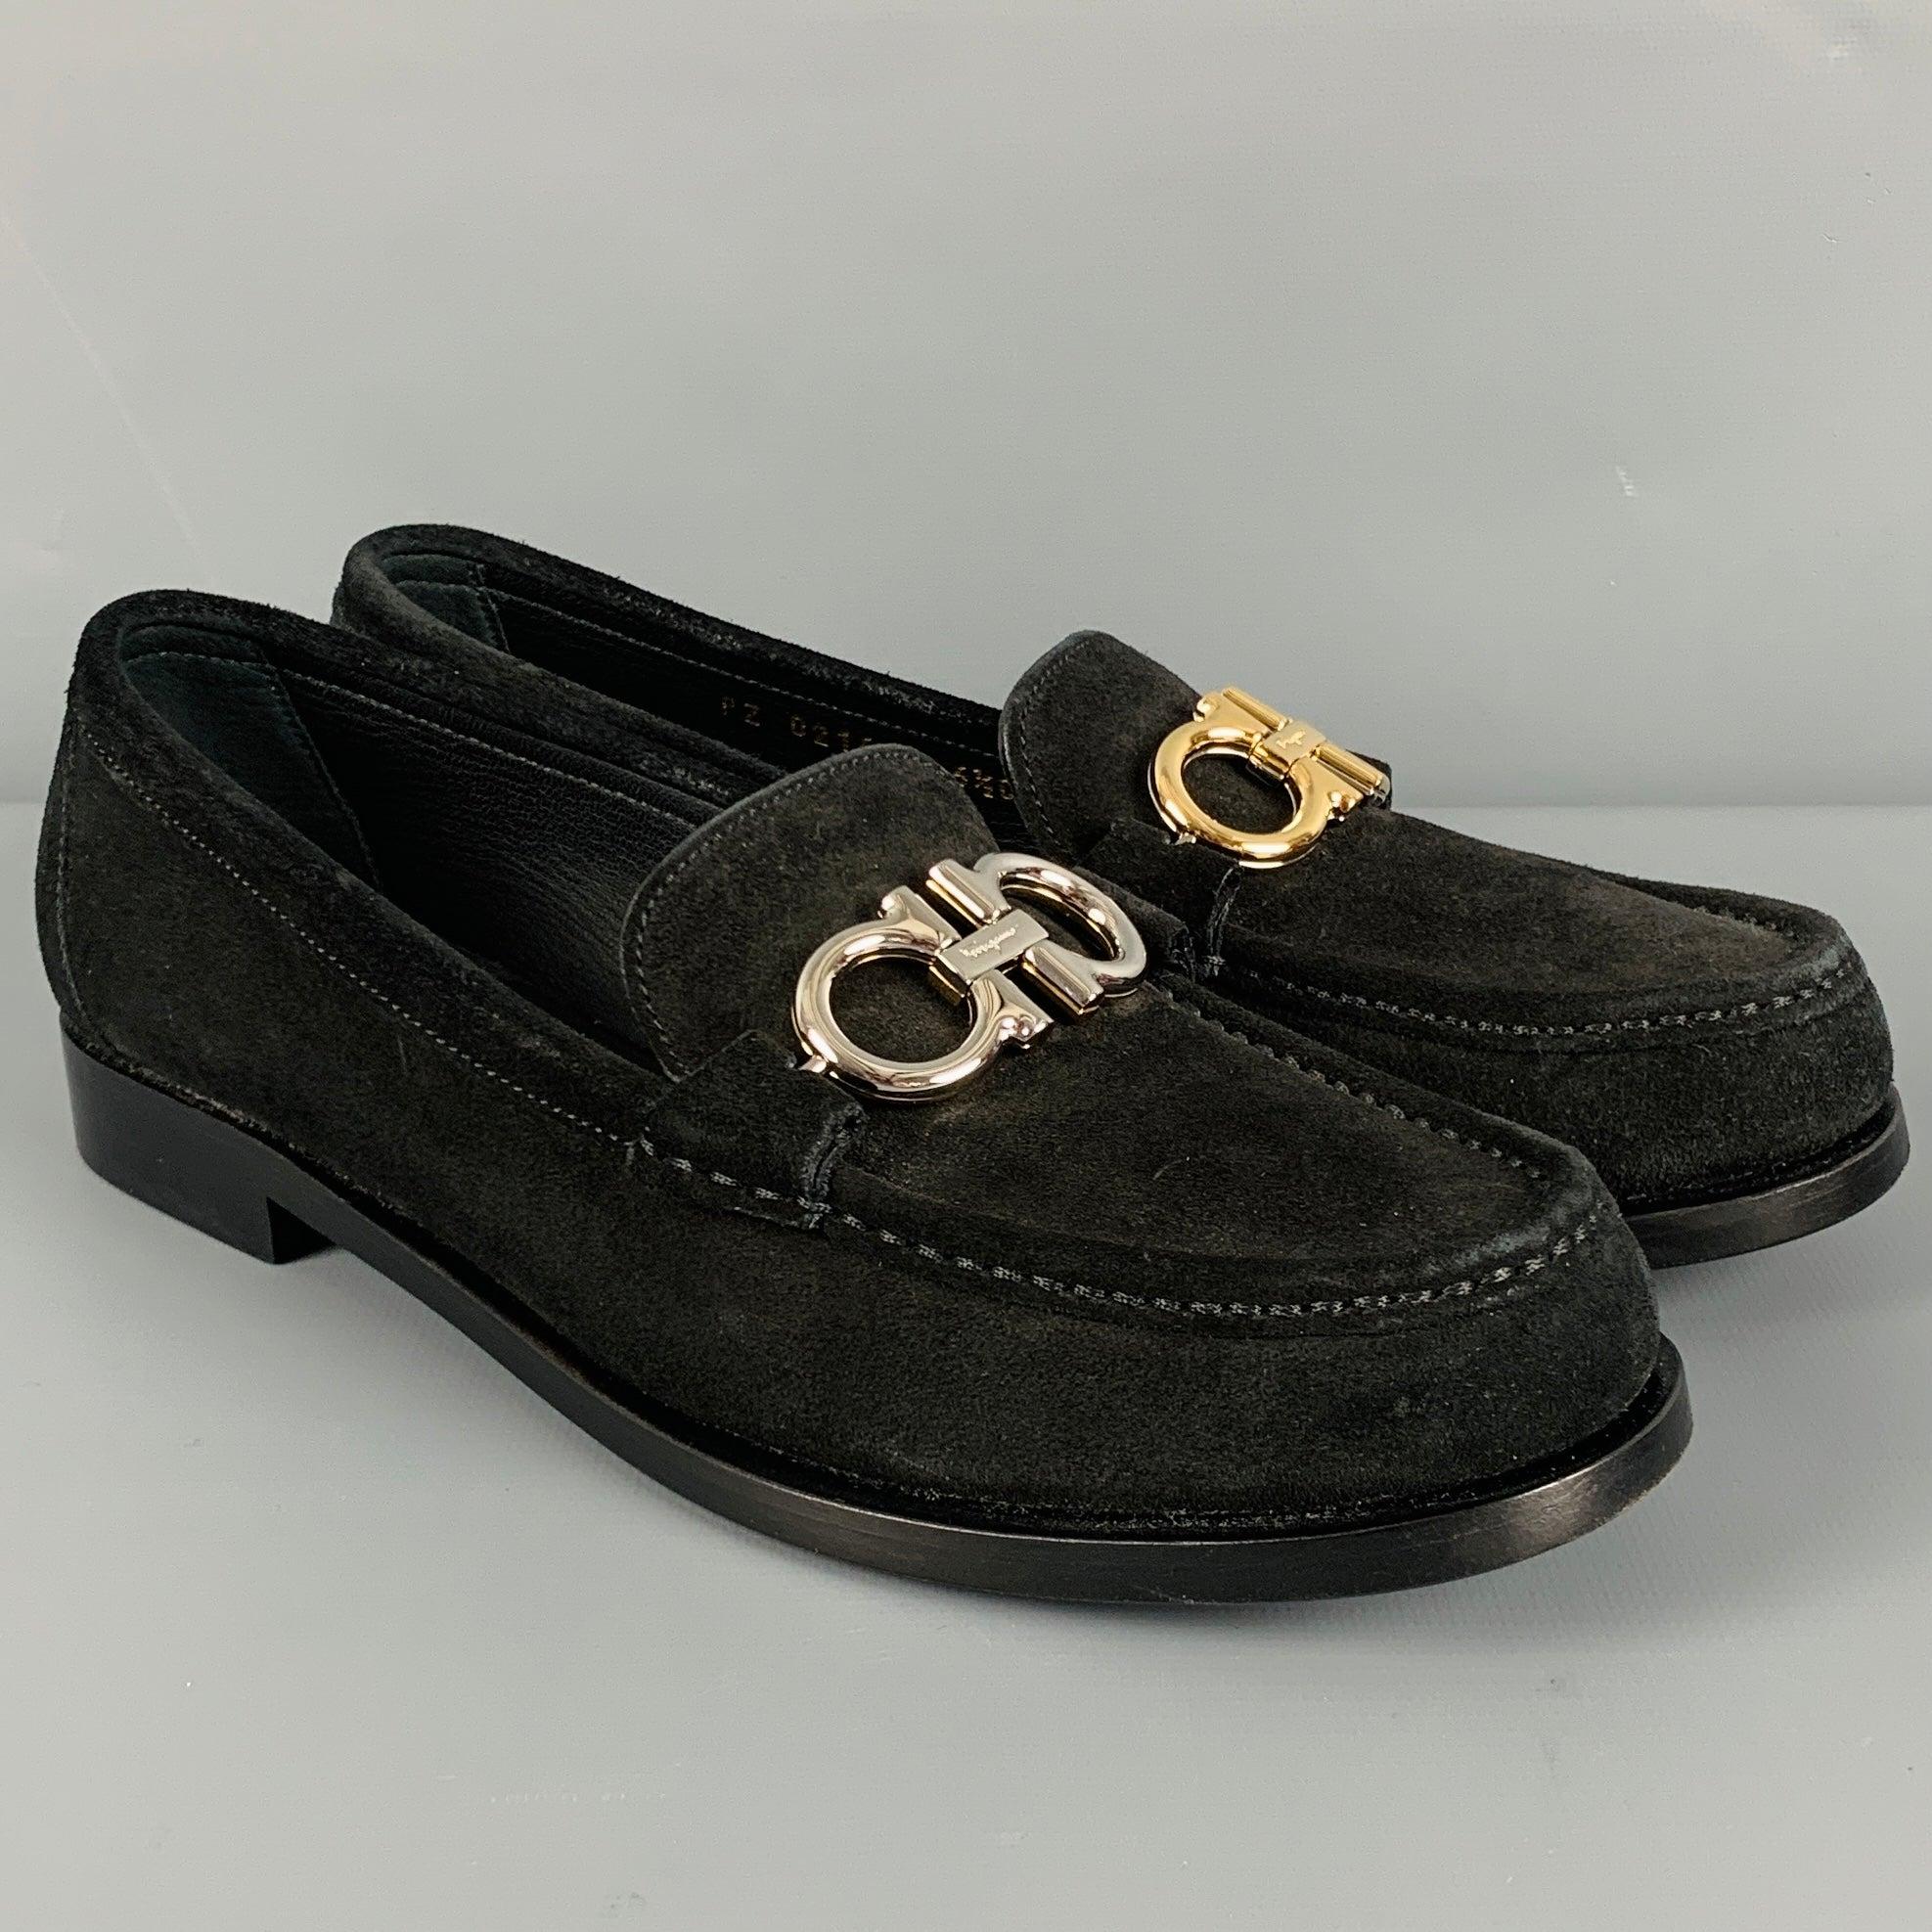 SALVATORE FERRAGAMO flats in a black suede featuring a loafer style, two tone silver and gold tone Ferragamo buckles, and slip on closure. Comes with box. Made in Italy.New with Box. 

Marked:   PZ 02161 6.5COutsole:9.75 x 3.25
inches 
  
  
